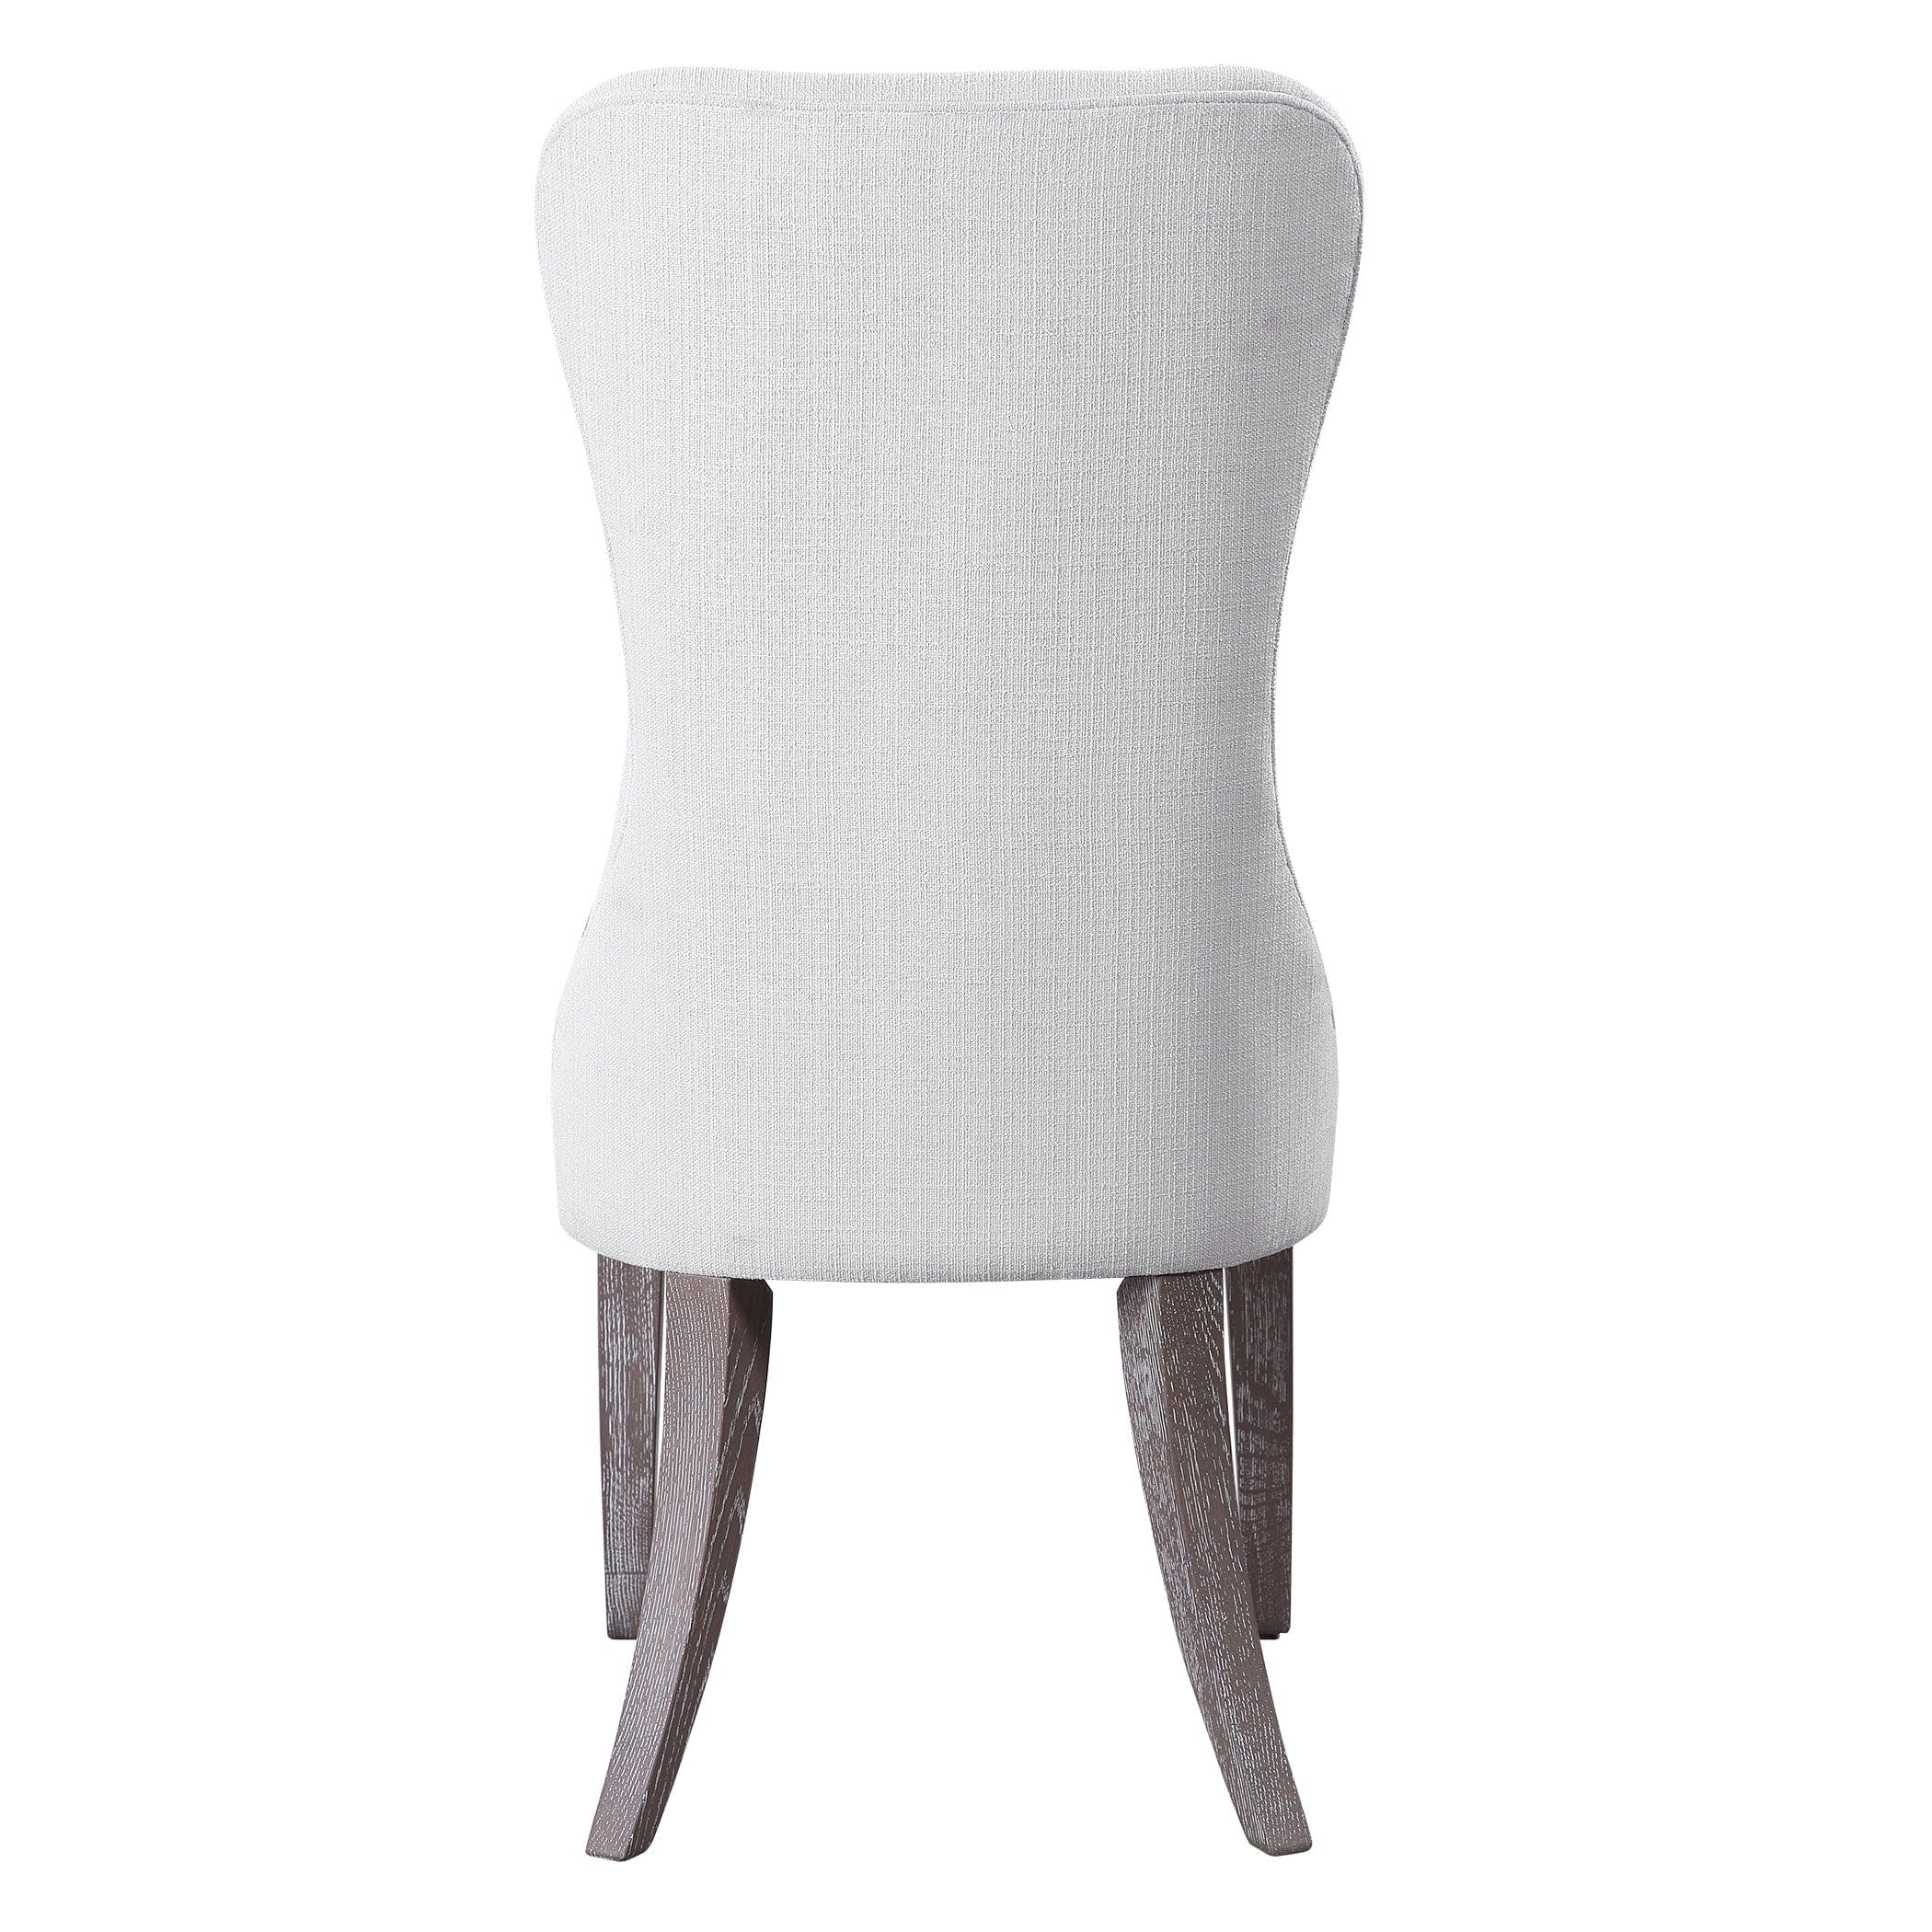 Caledonia Armless Chair Uttermost